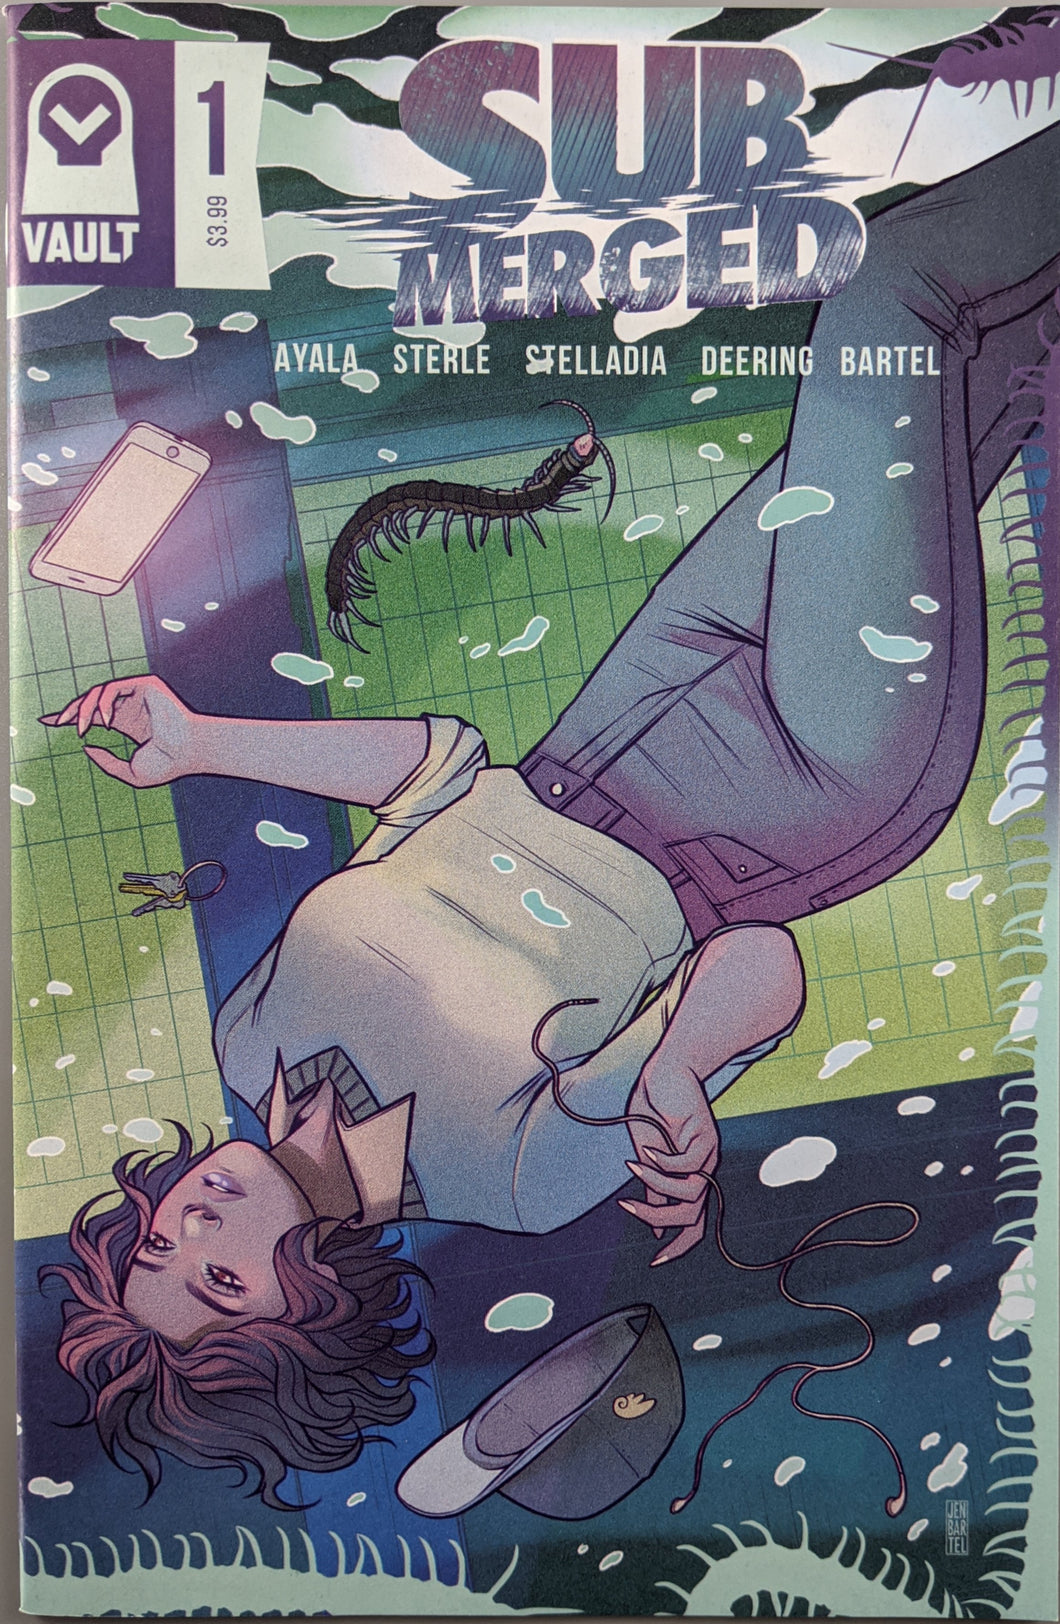 Submerged (2018) #1 Cover A (Bartel)